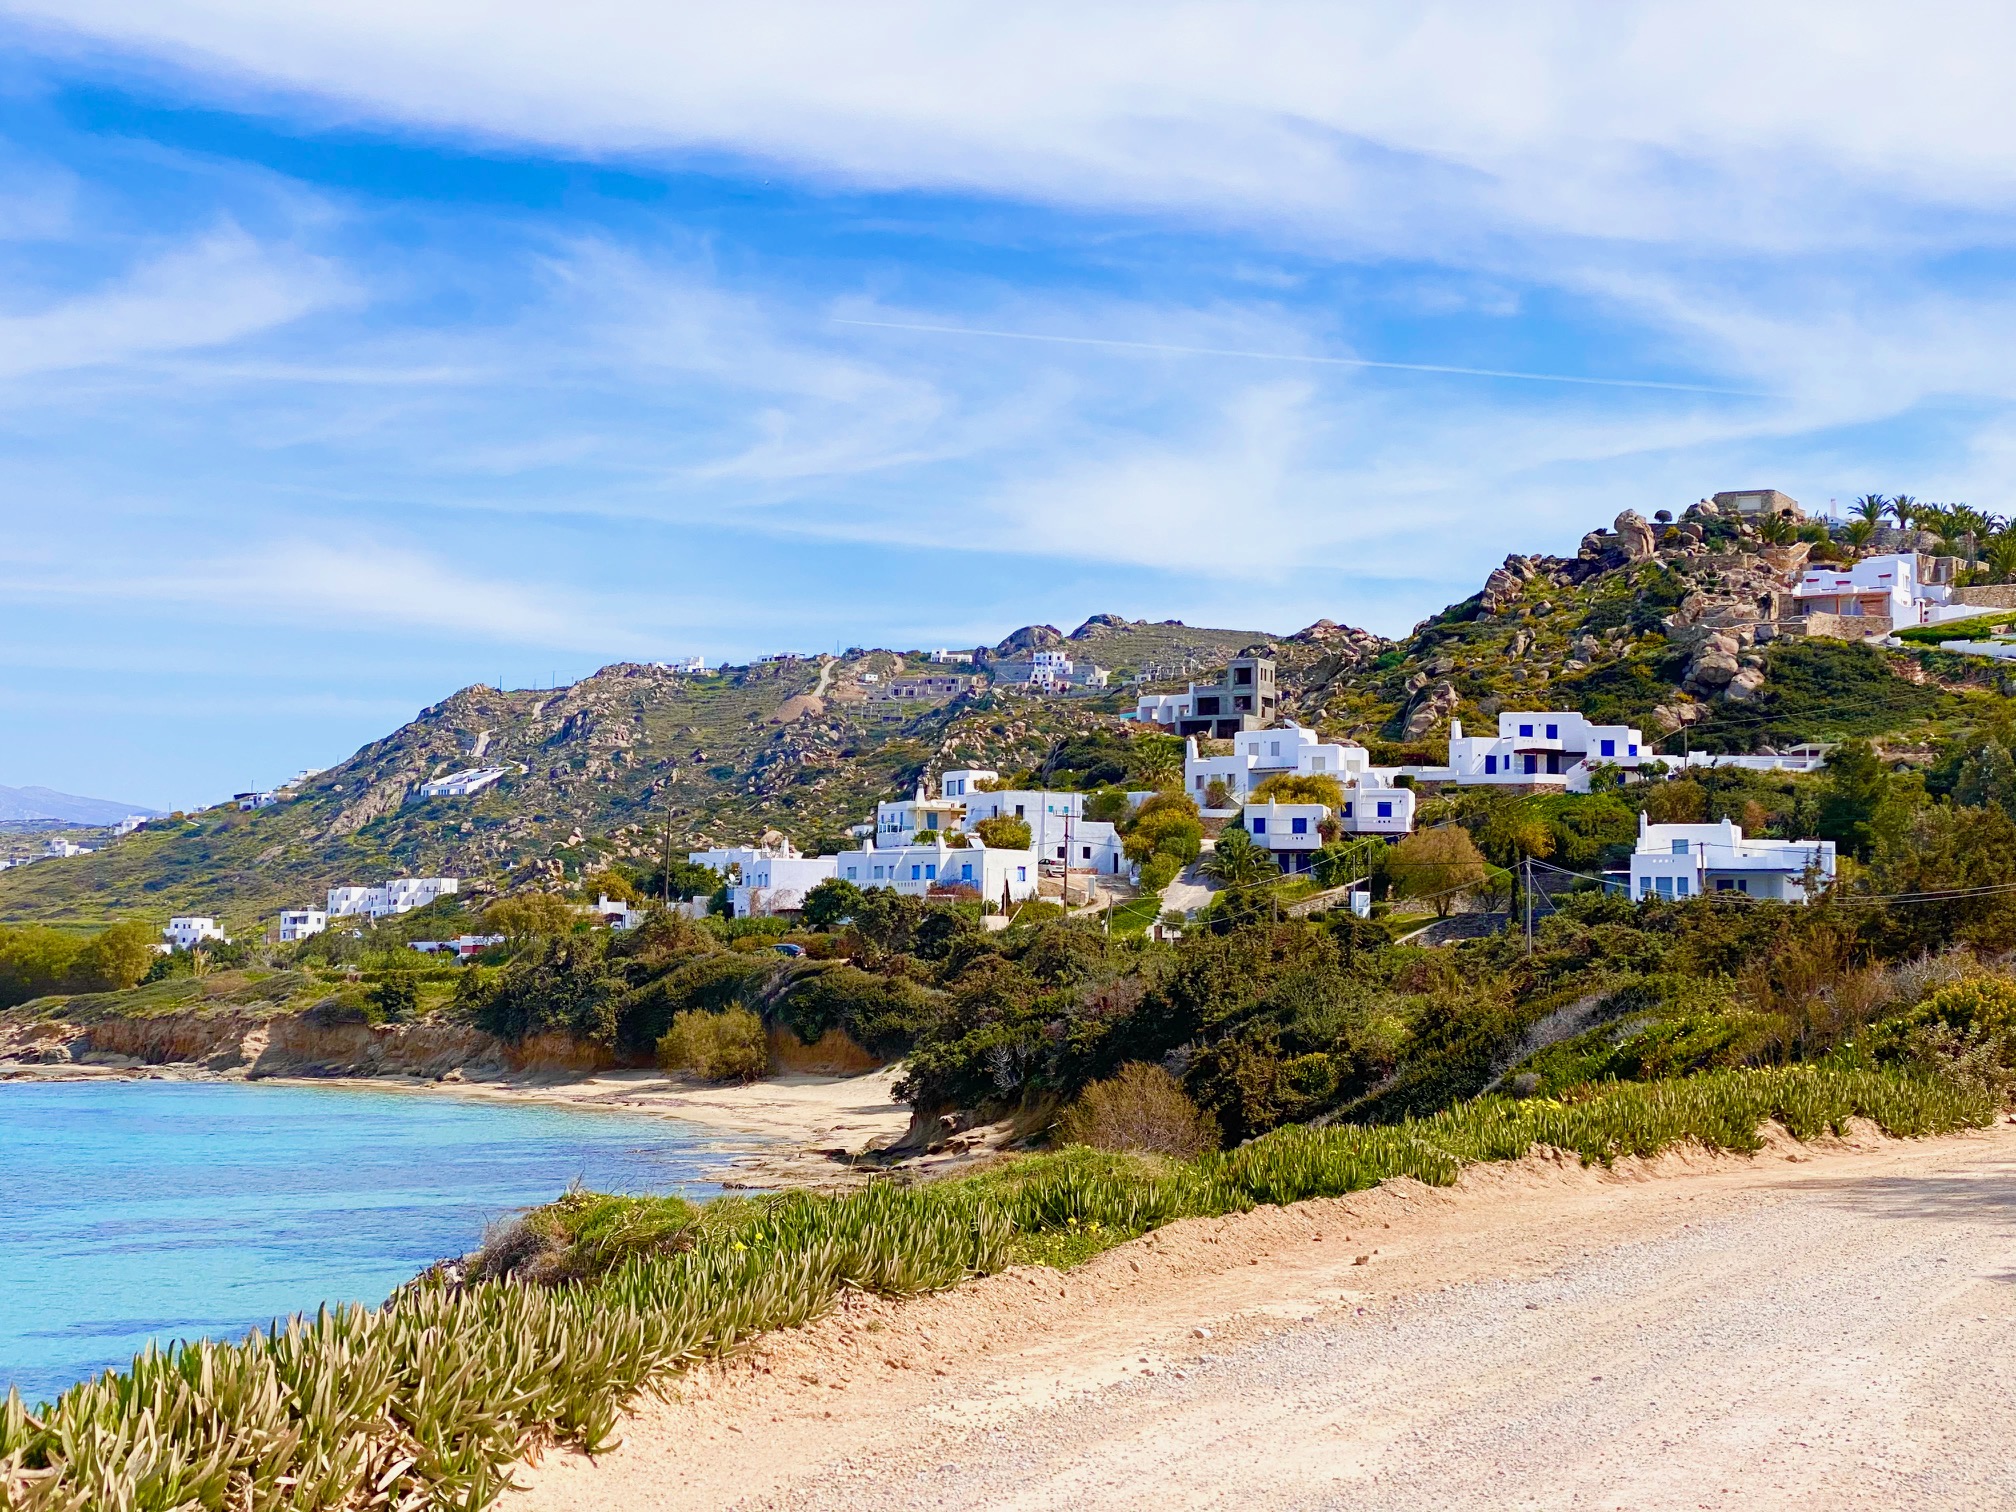 View of dirt road with the sea, beach and villas beyond | Should I Rent a Car in Naxos? | greekislandbucketlist.com